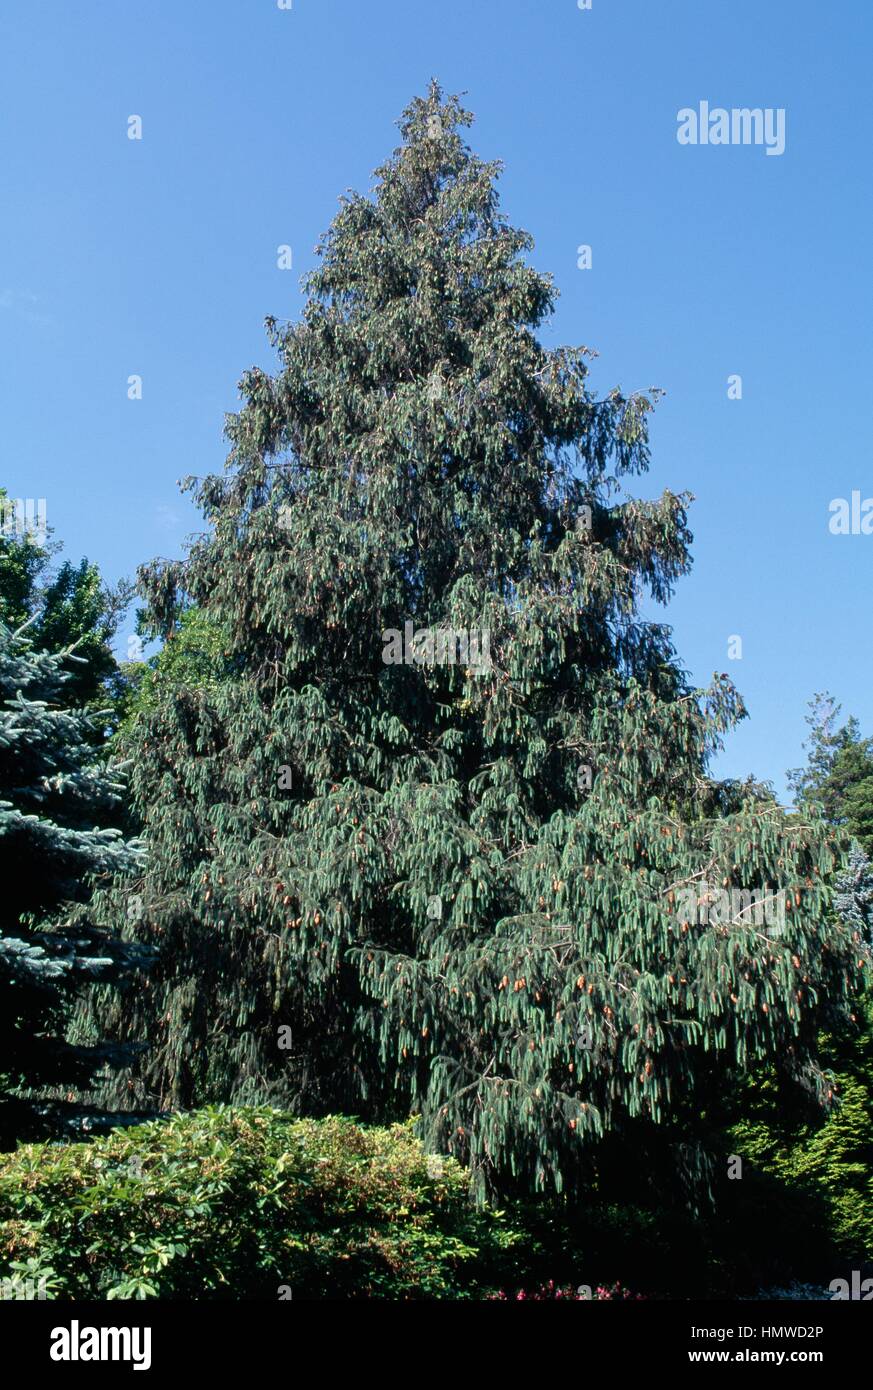 Sikkim Spruce (Picea spinulosa), Pinaceae. Stock Photo